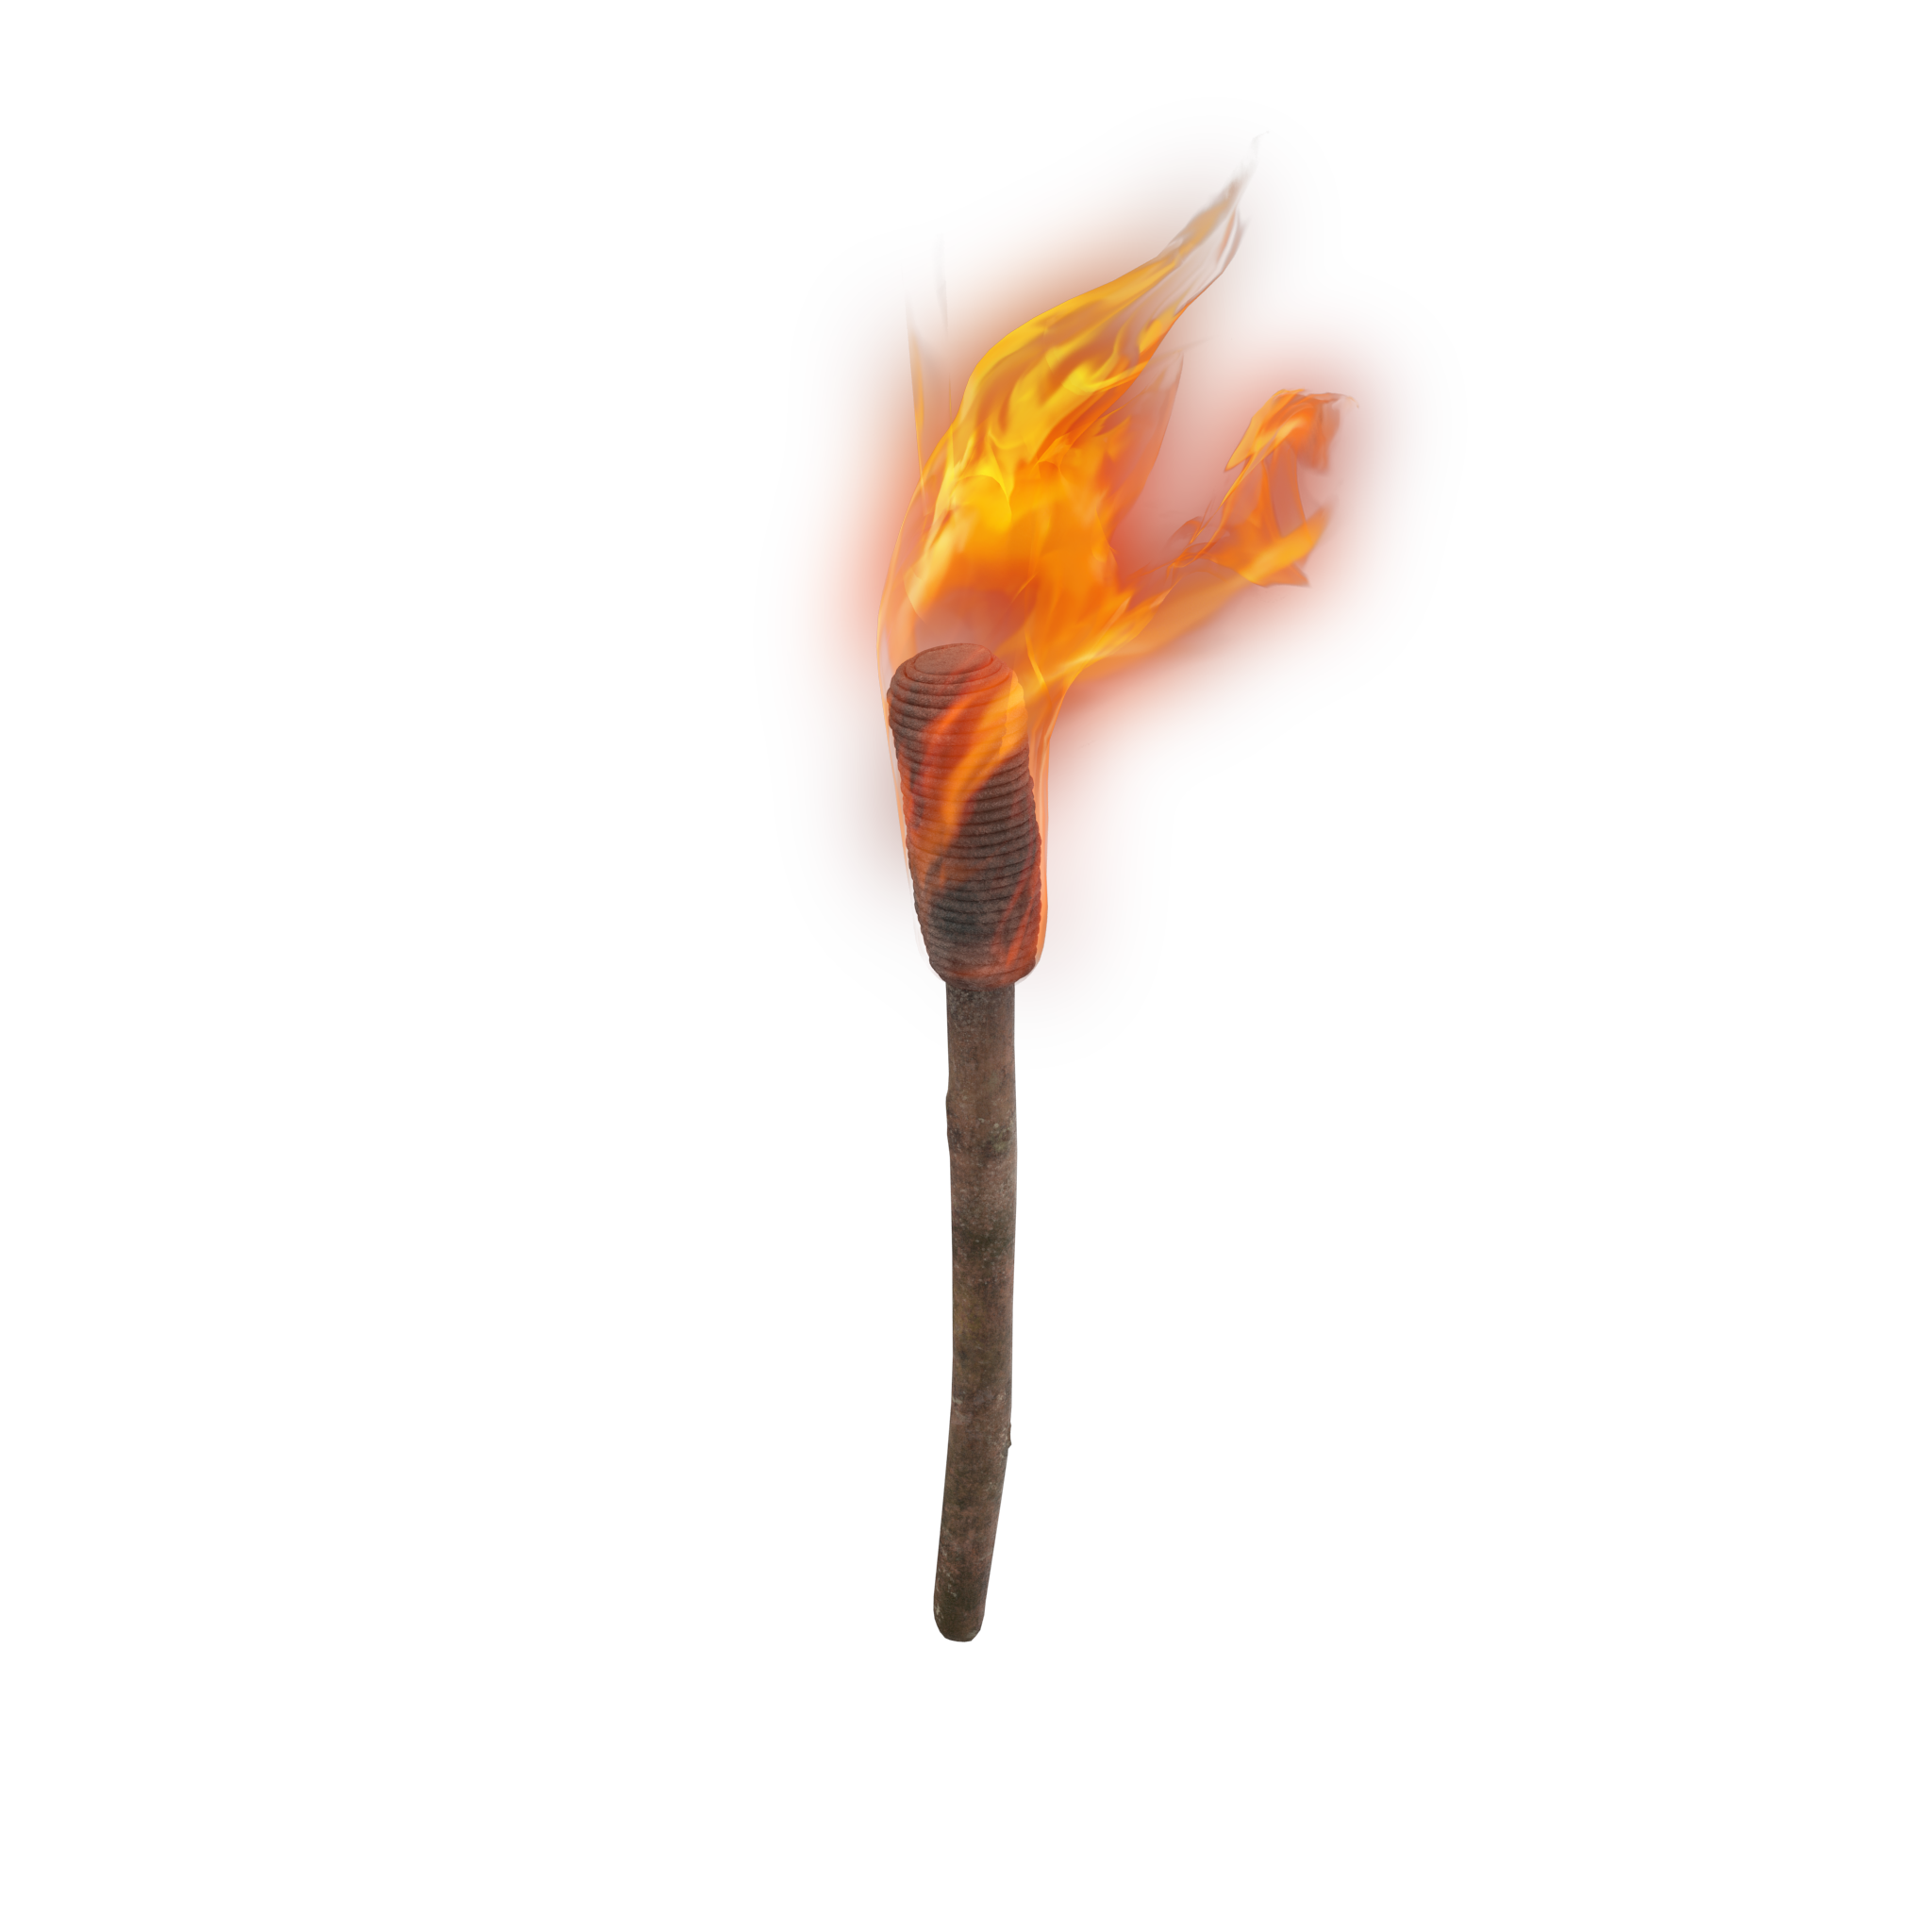 torch clipart old